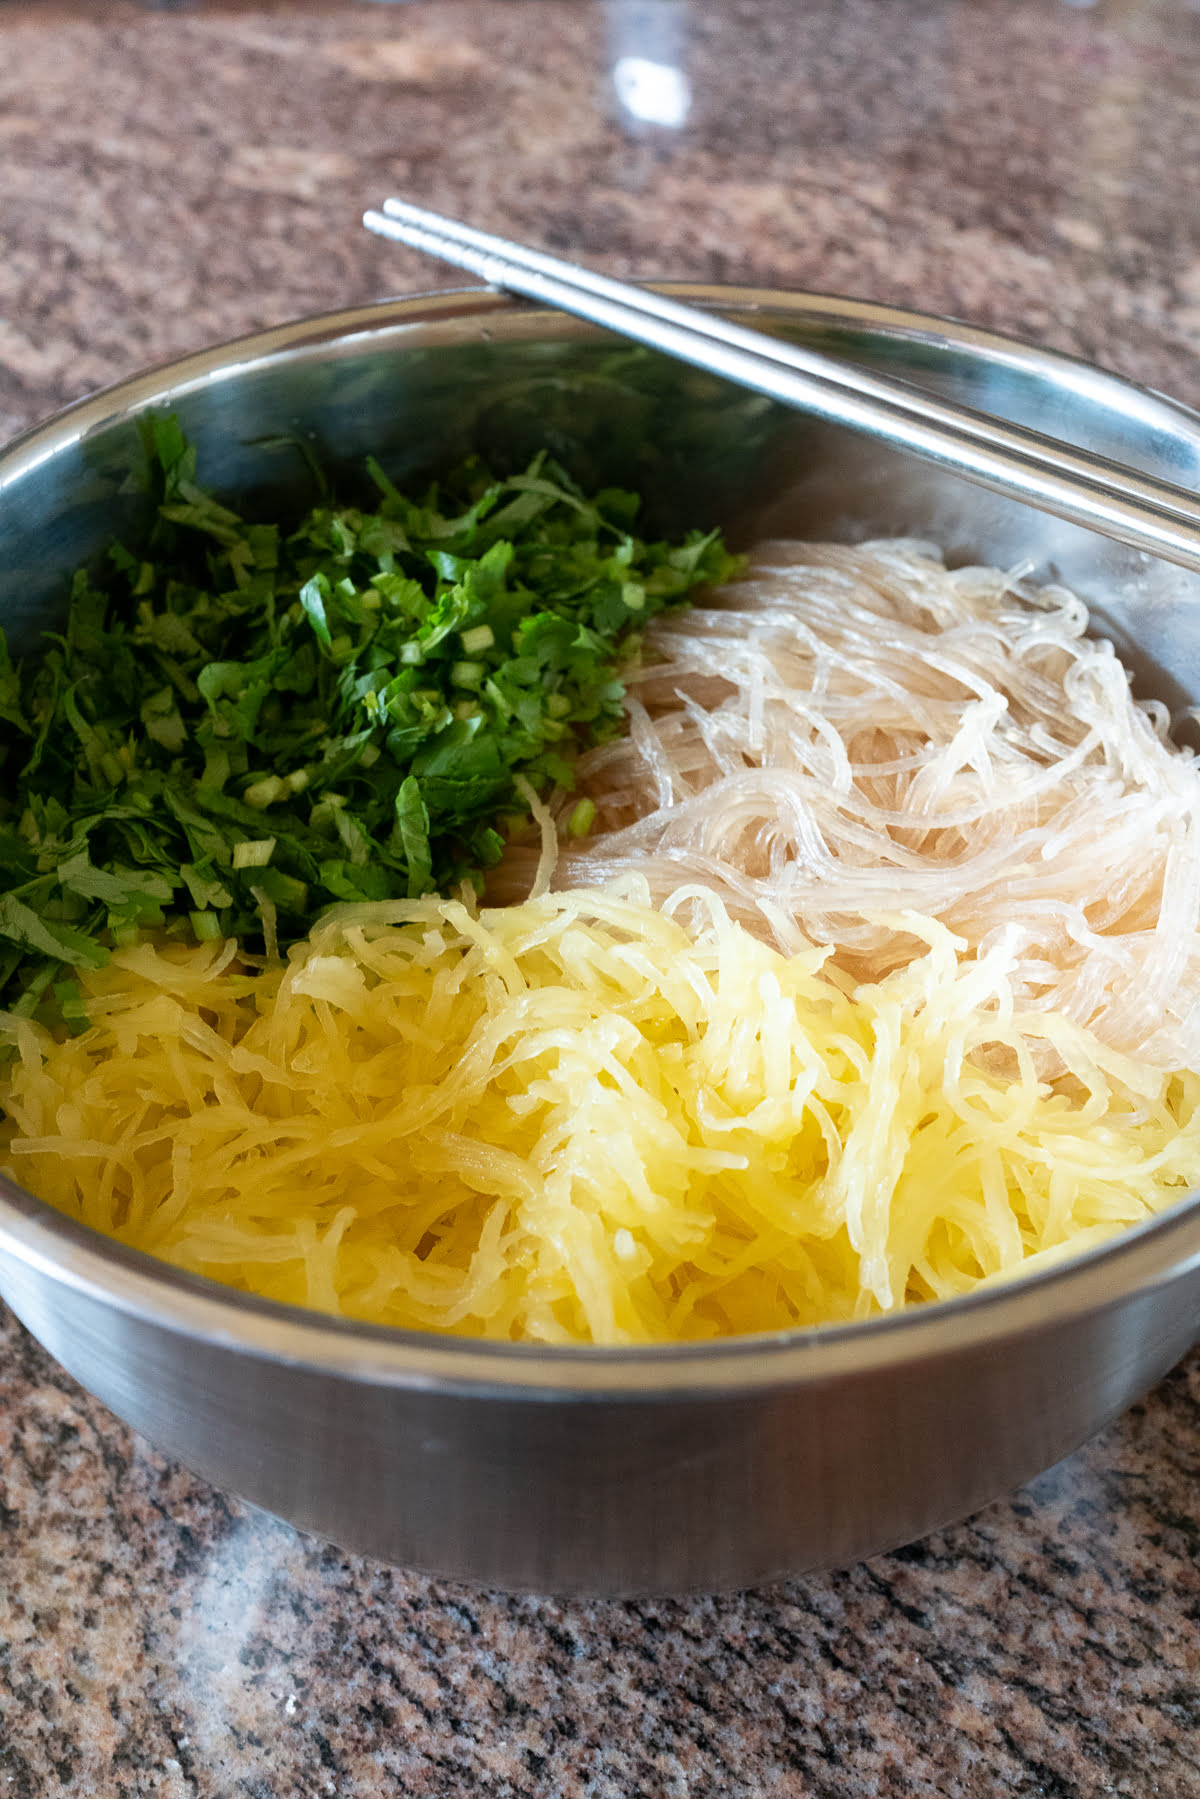 A mixing bowl with roasted spaghetti squash, glass noodles, and cilantro.